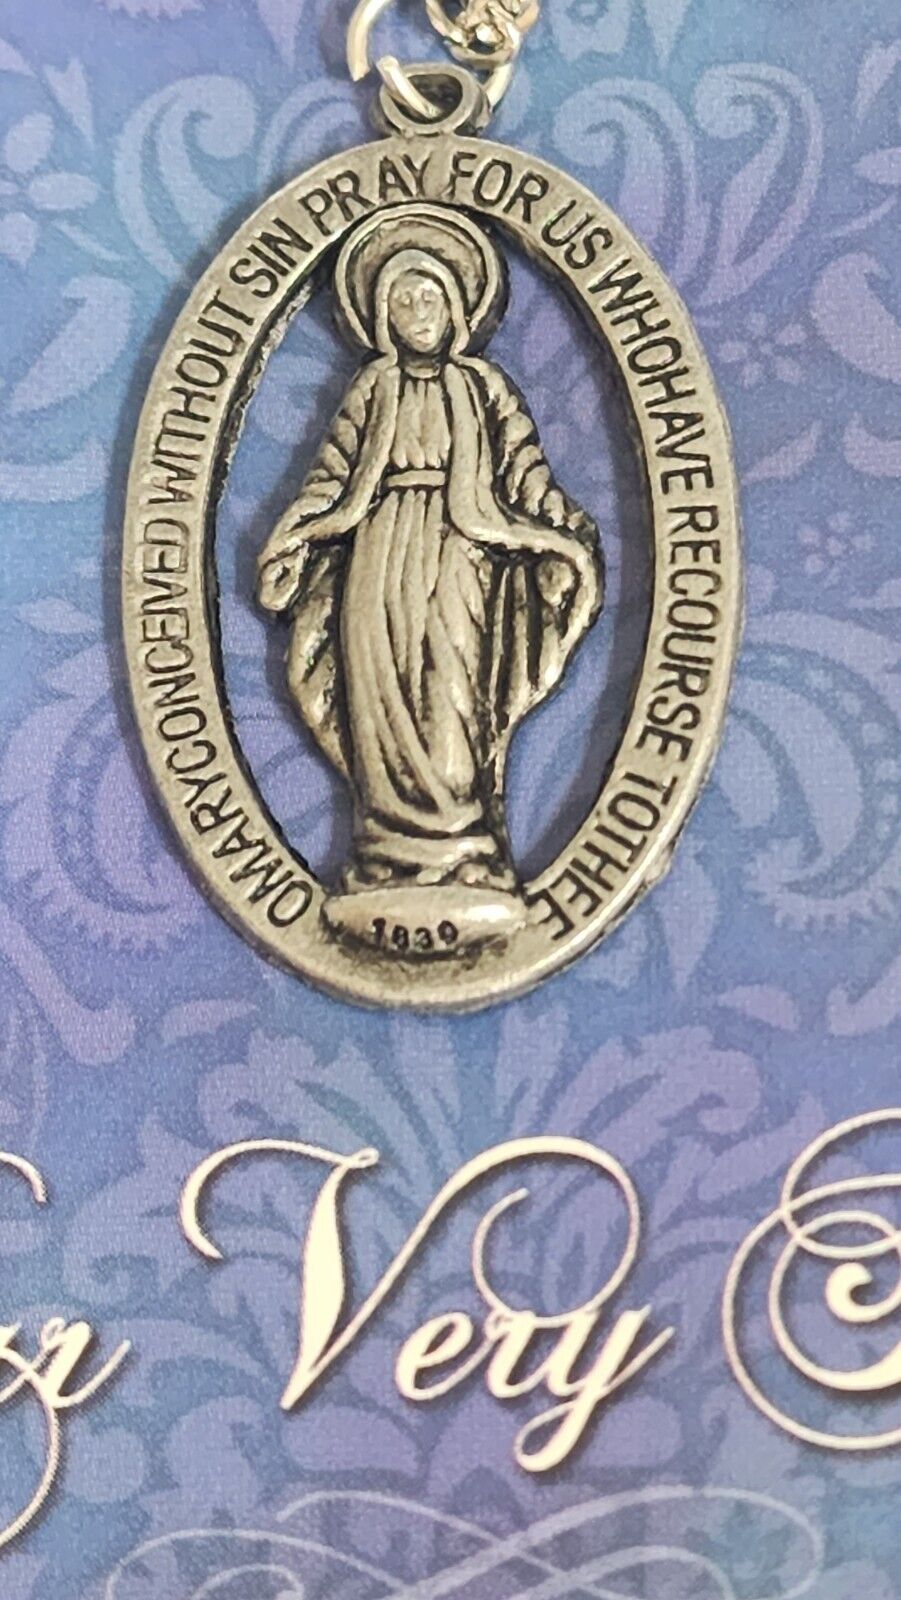 St. Mary Miraculous Pendant & Chain Religious Catholic Jewelry Medal Pewter